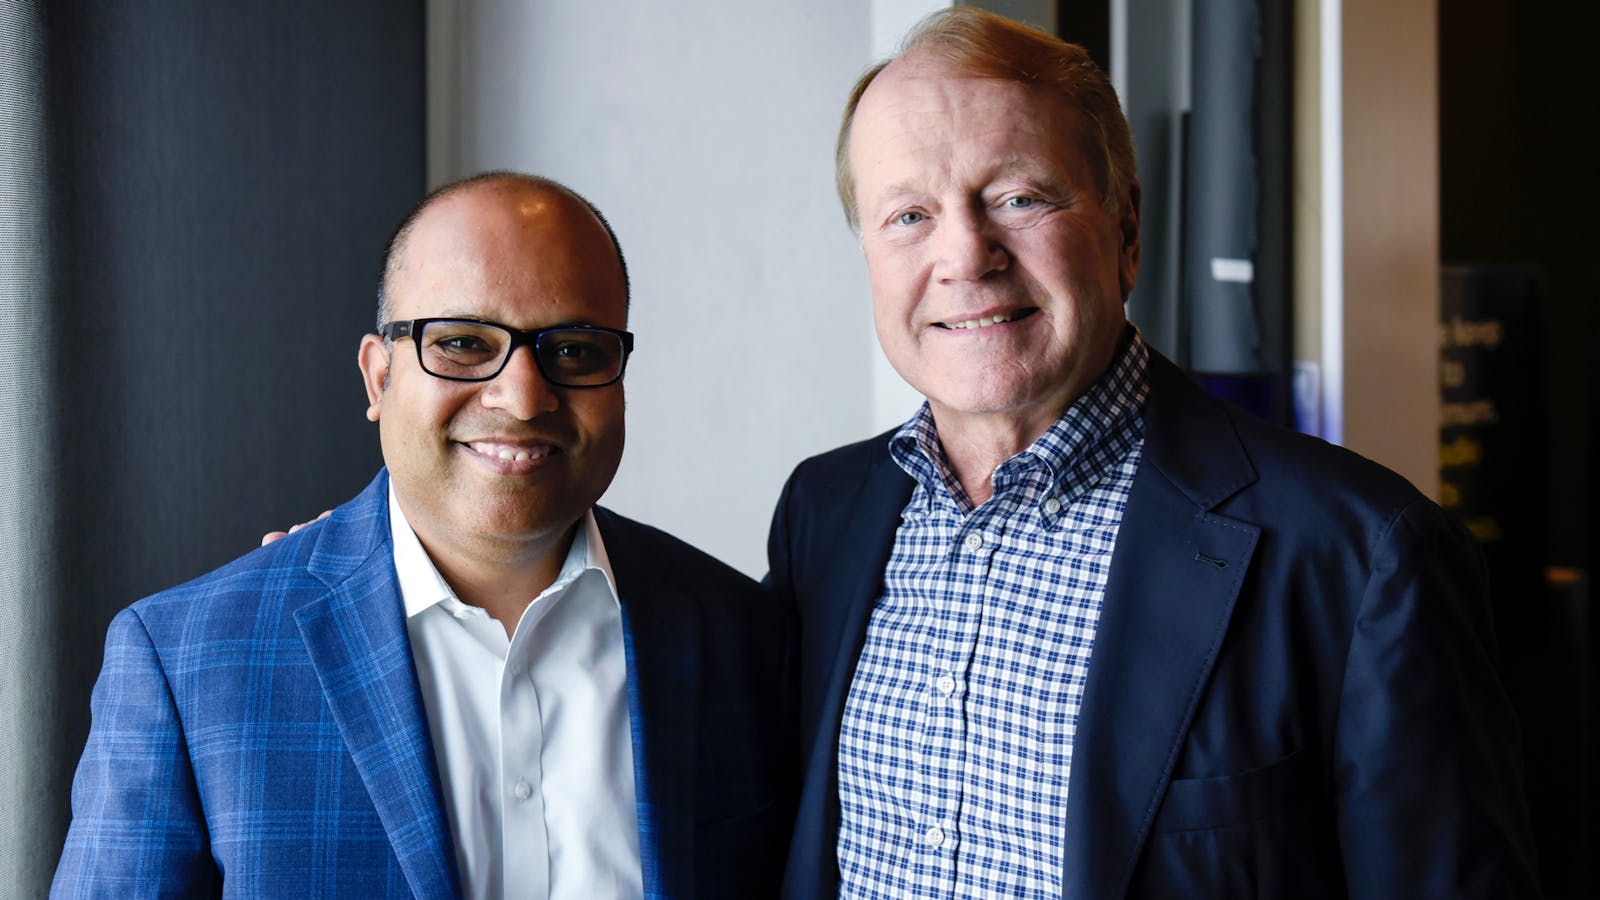 Rubrik CEO Bipul Sinha, left, and Rubrik adviser and former Cisco CEO John Chambers. Photo by Bloomberg